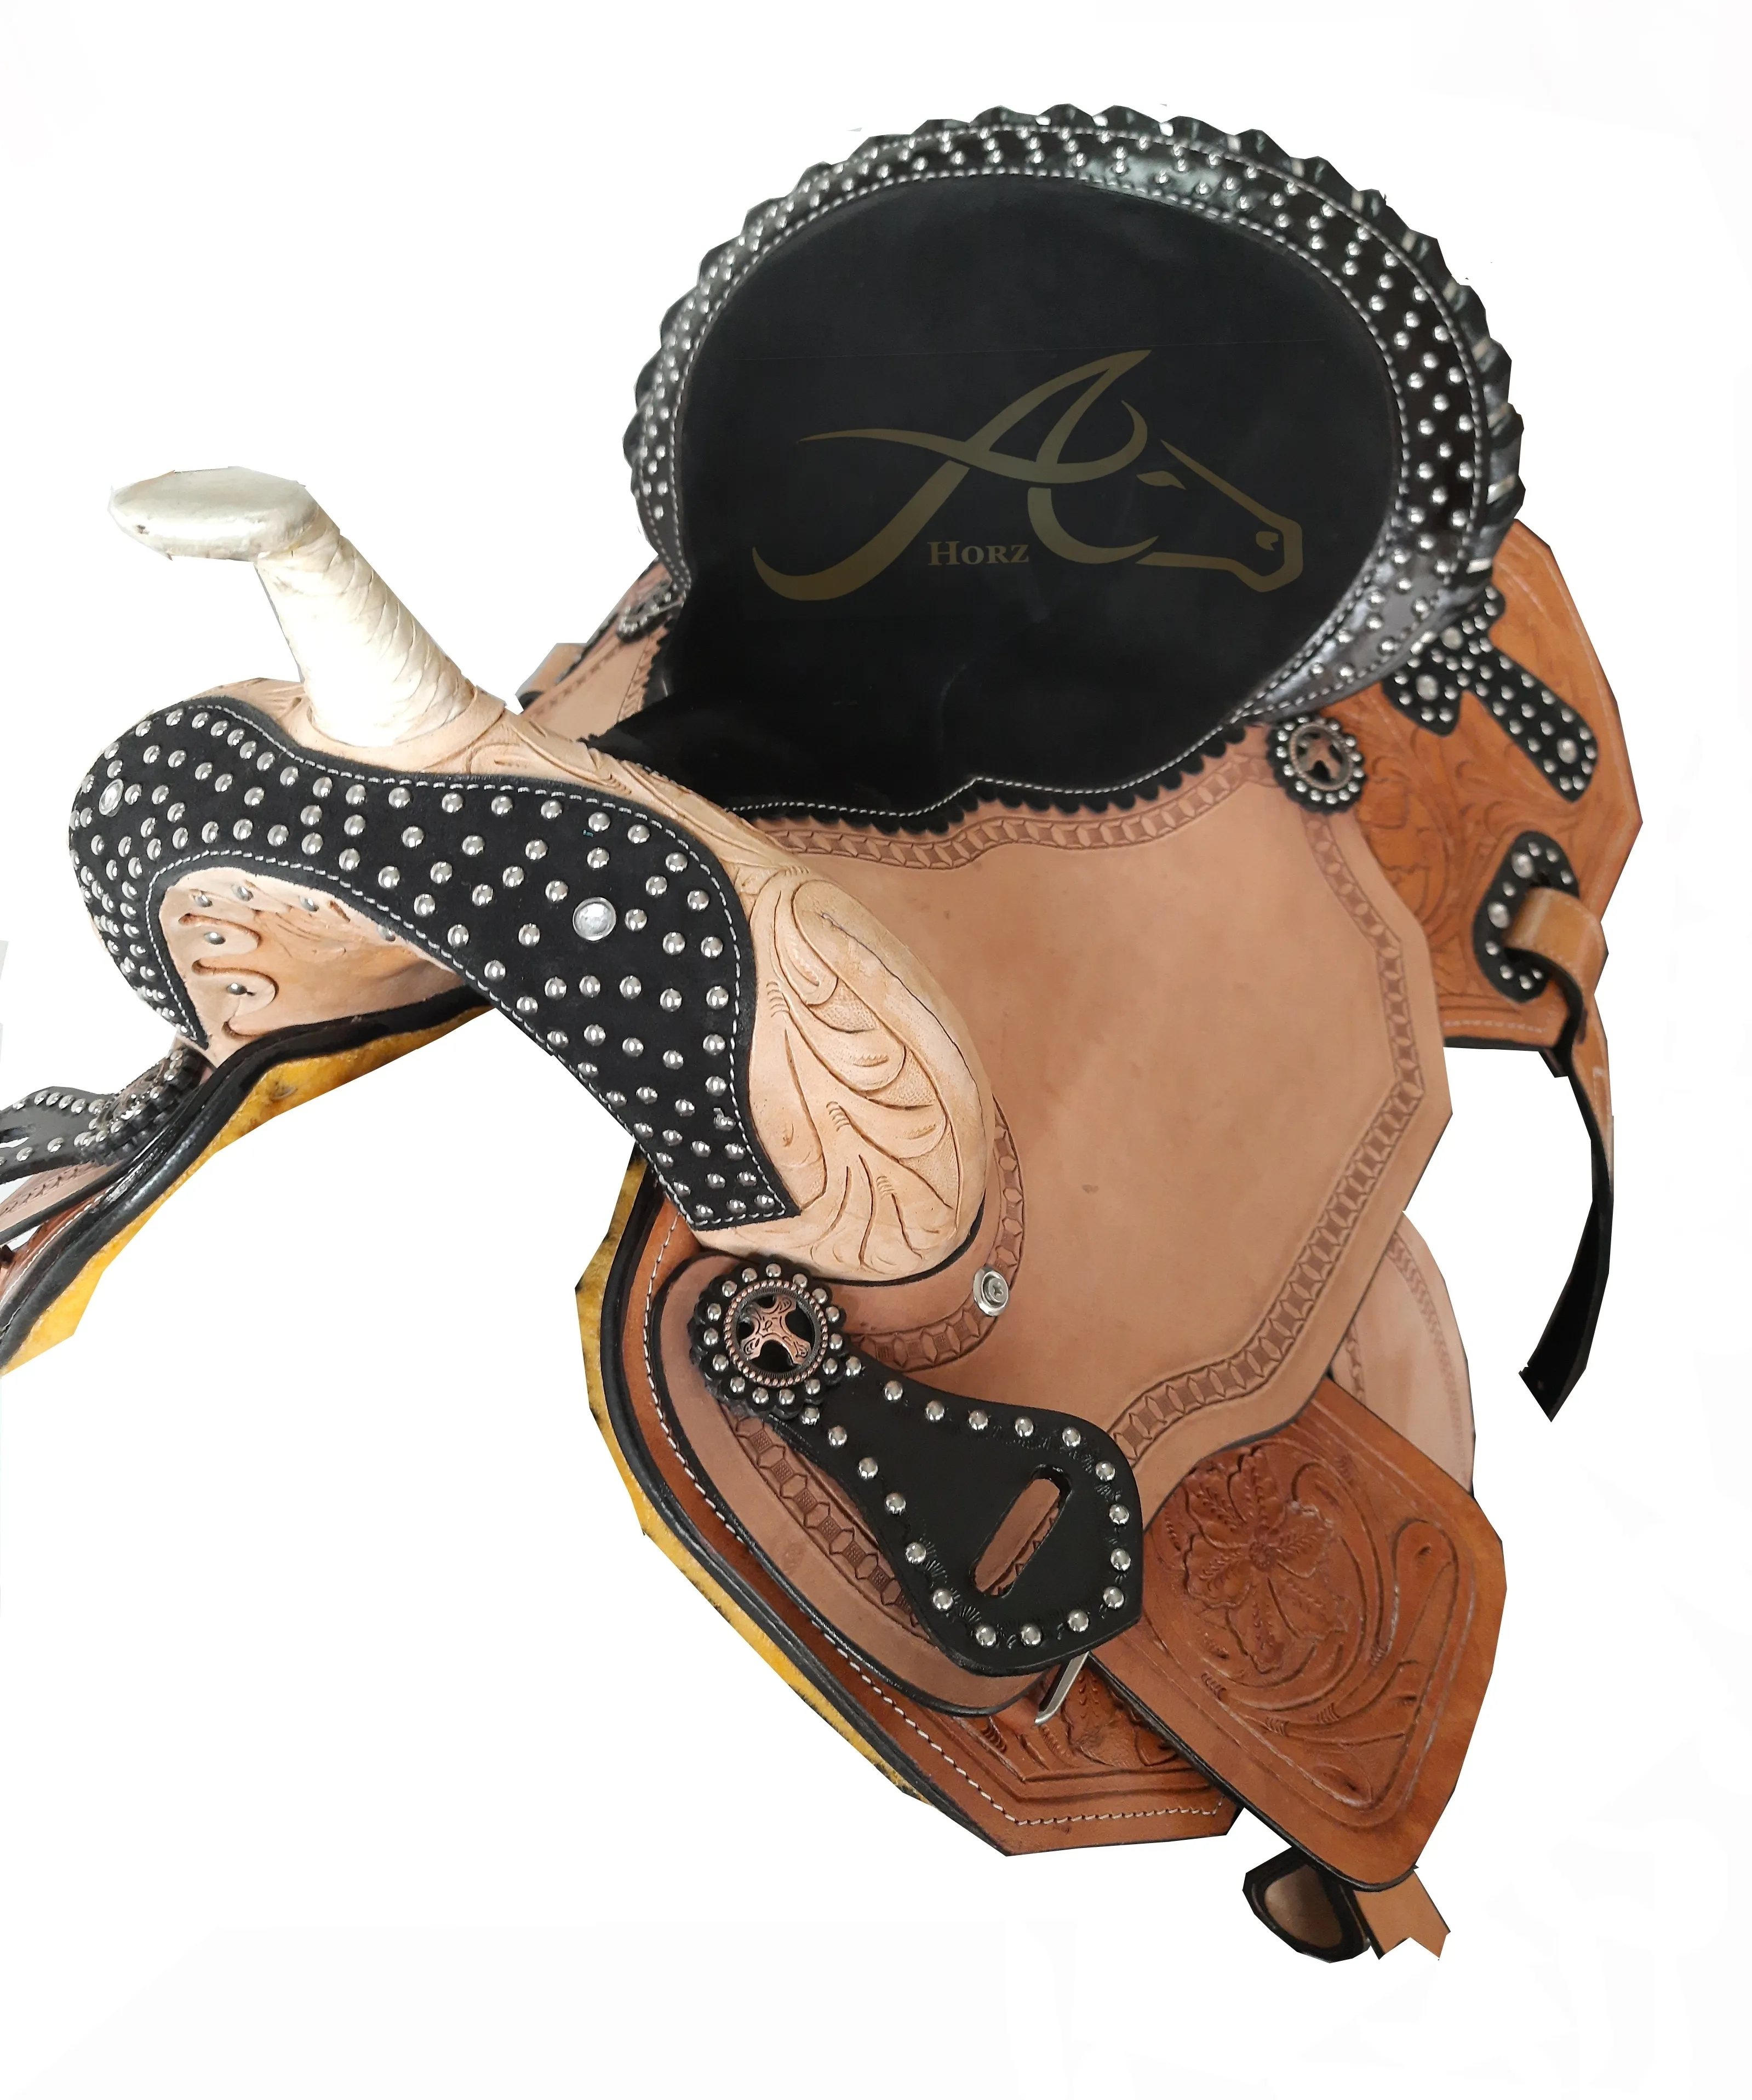 Hot Selling New Design Western Saddle Harness Buffalo Leather from Indian Exporter and Manufacturer for Saddle Enthusiasts